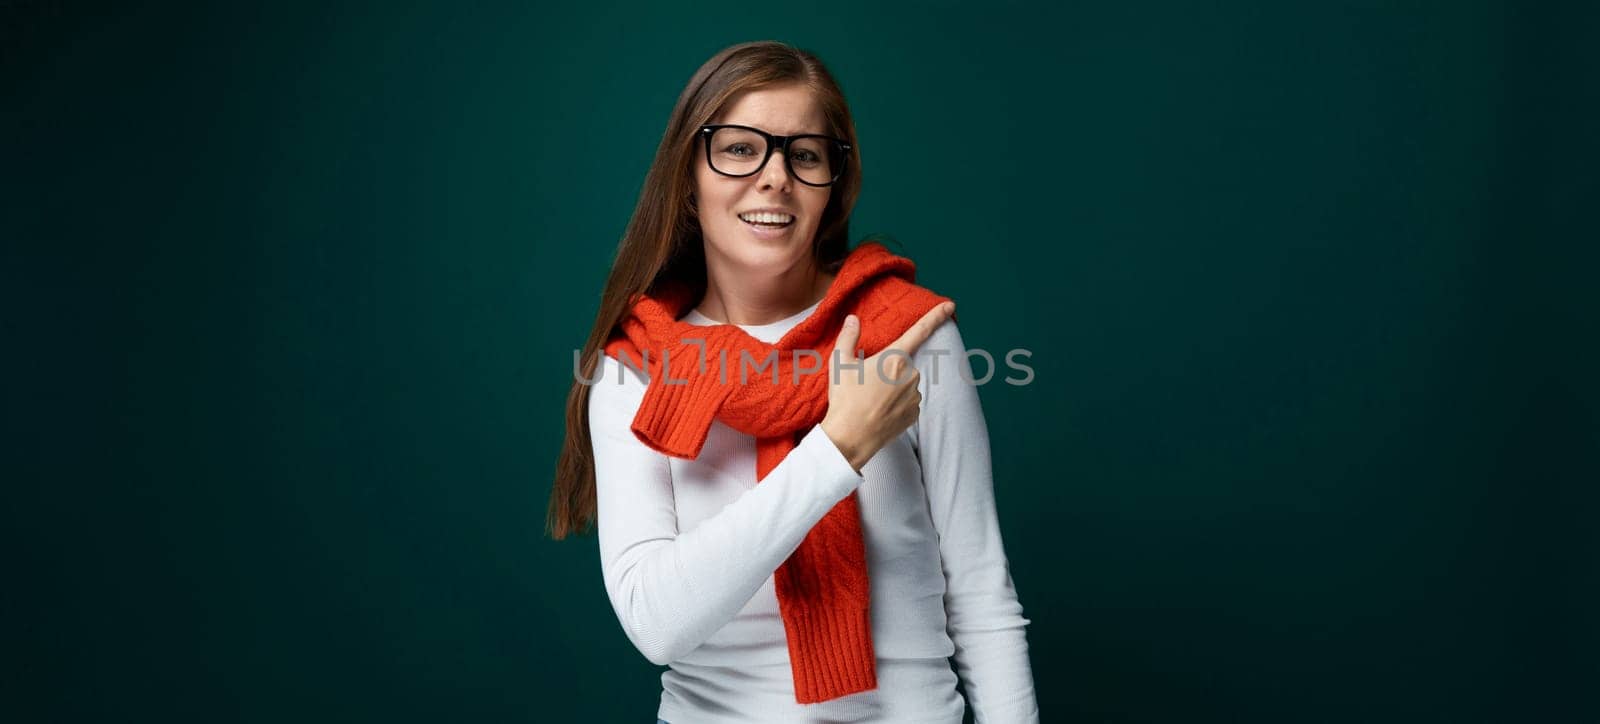 European young woman pointing with hand towards advertisement, business concept by TRMK